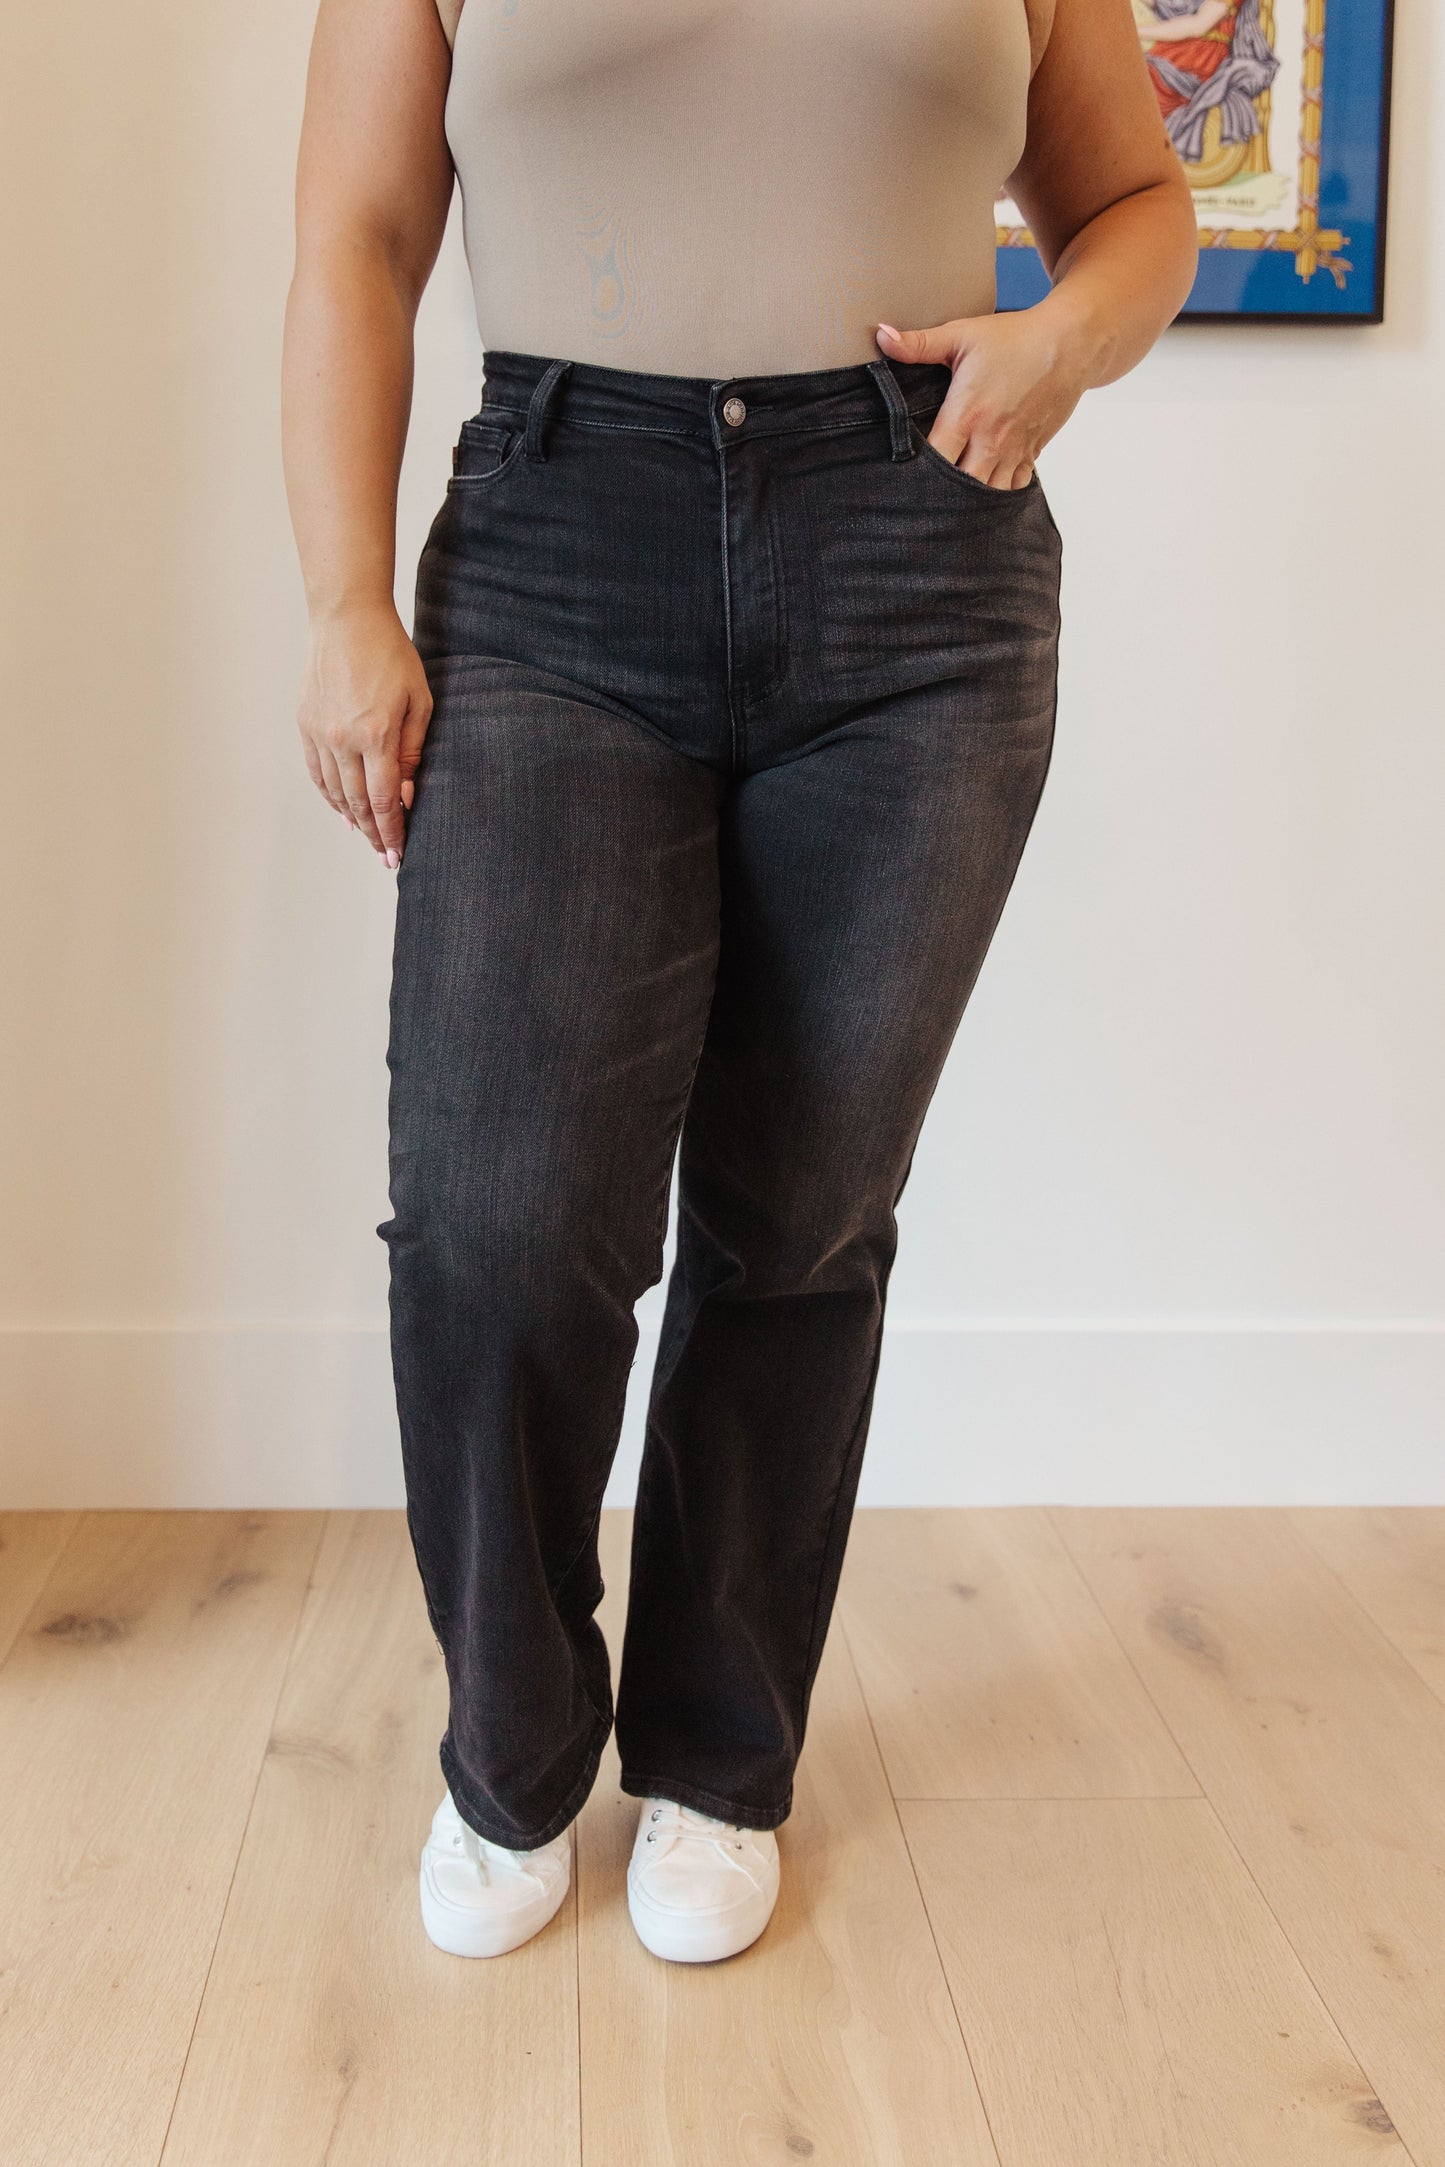 Judy Blue Eleanor Classic Straight Jeans in Washed Black